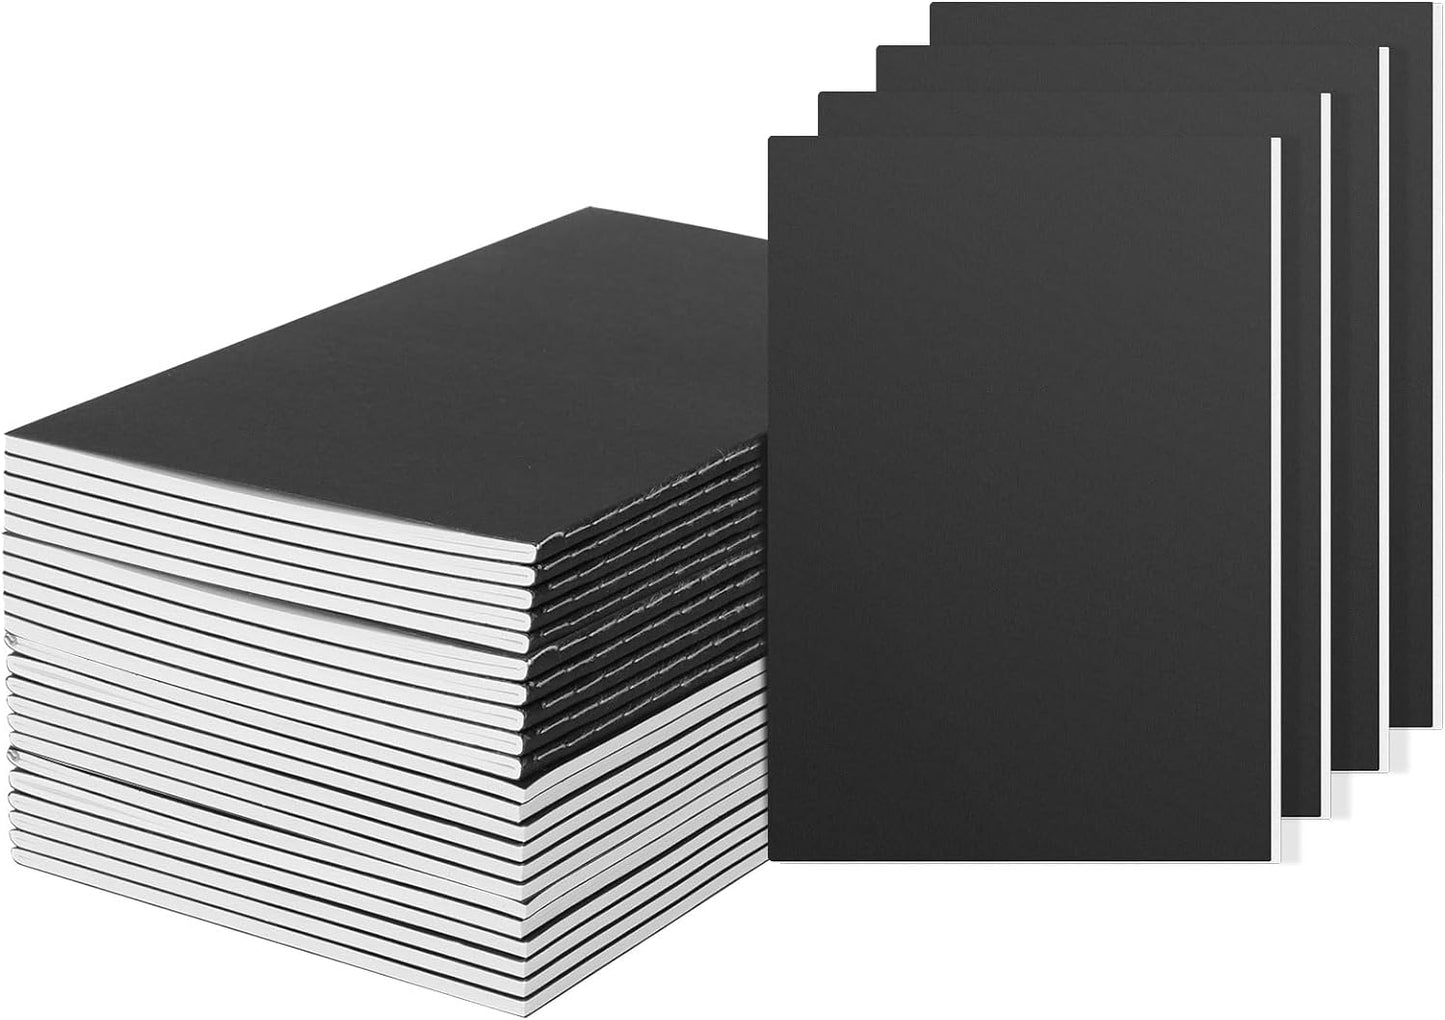 24 Pack Notebooks, Journals in Bulk, Blank Paper Sketchbooks, 72 Pages, 36 Sheets, 80GSM, 8.3X5.5 Inch, A5 Size, Travel Writing Notebooks Journal for Office School Supplies (24Pack, Black)